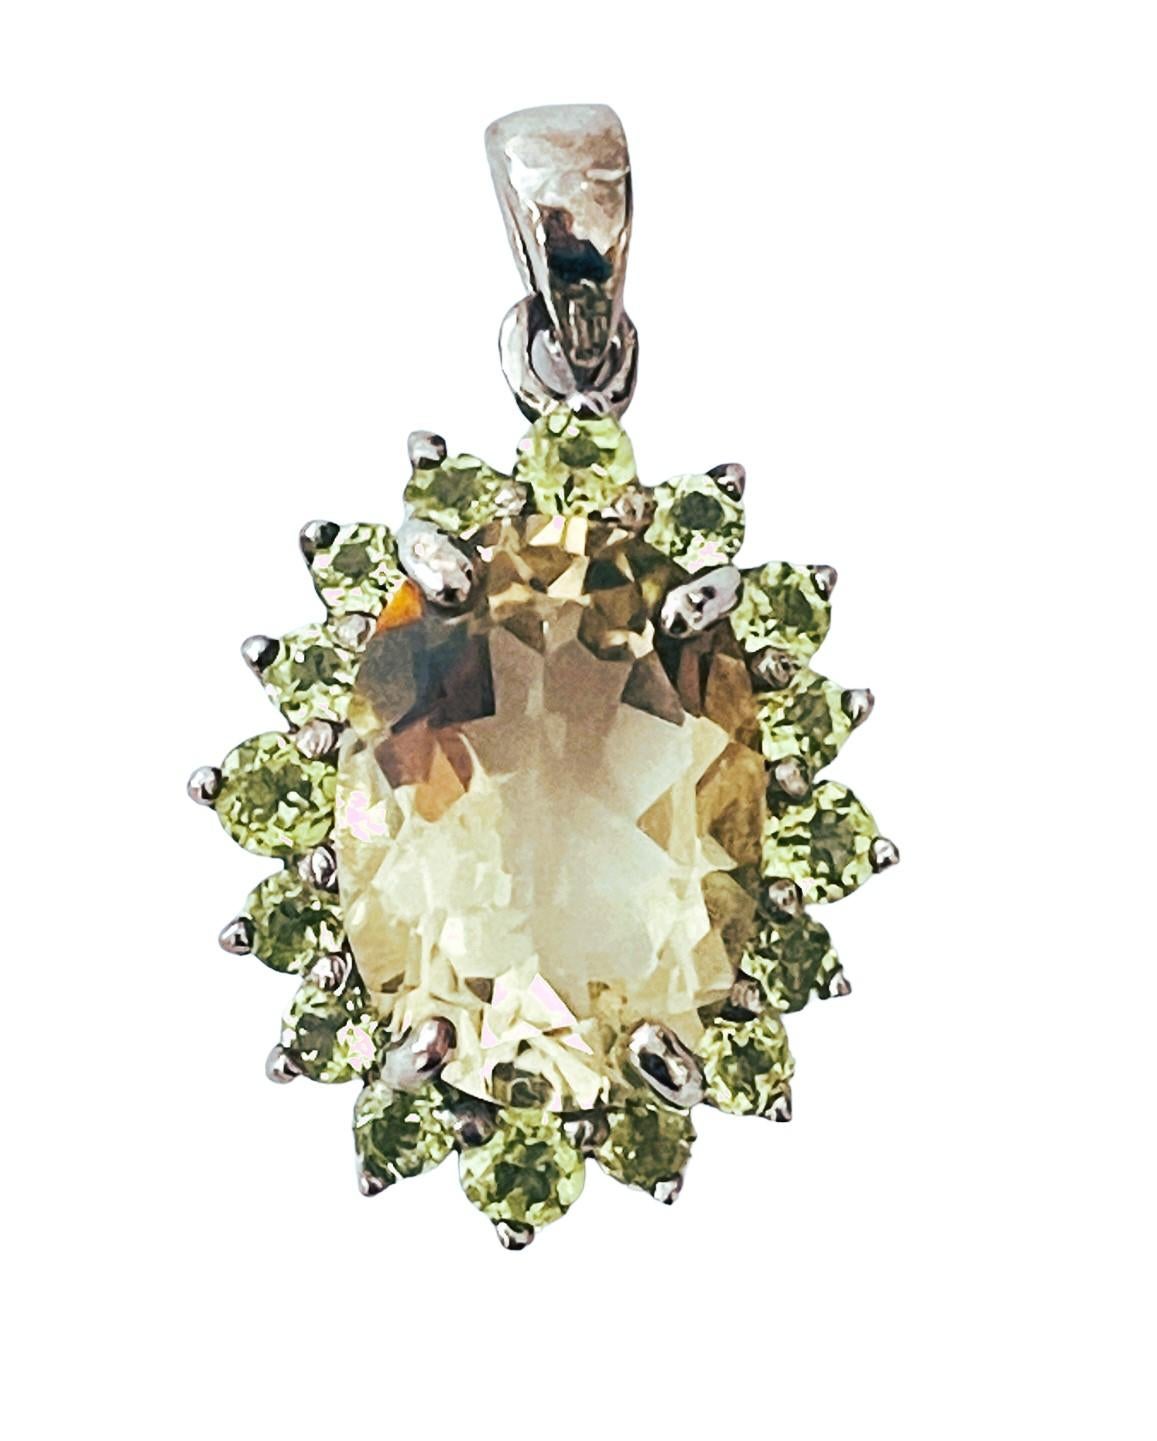 This pendant is just so beautiful!  The stone was mined in Brazil and is just exquisite.  It is a very high quality natural stone.   It is an oval cut and is 5.81 Ct   The main stone is 14 x 10 mm and is surrounded by diamond cut green Peridot